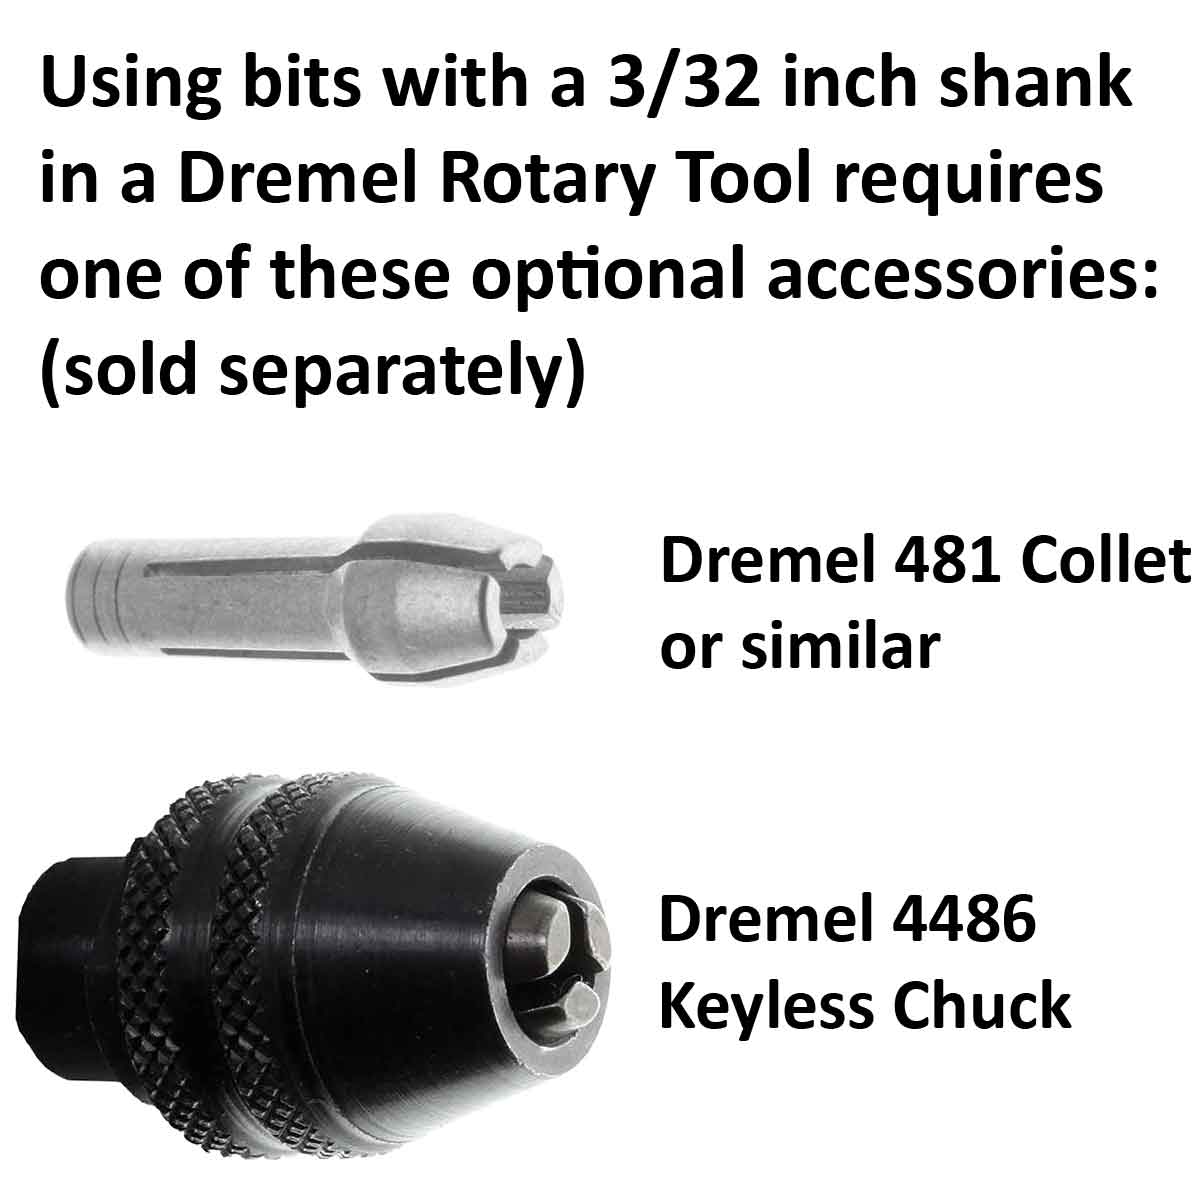 Compare to Dremel 106 1/16 inch Ball Engraver 3/32 shank